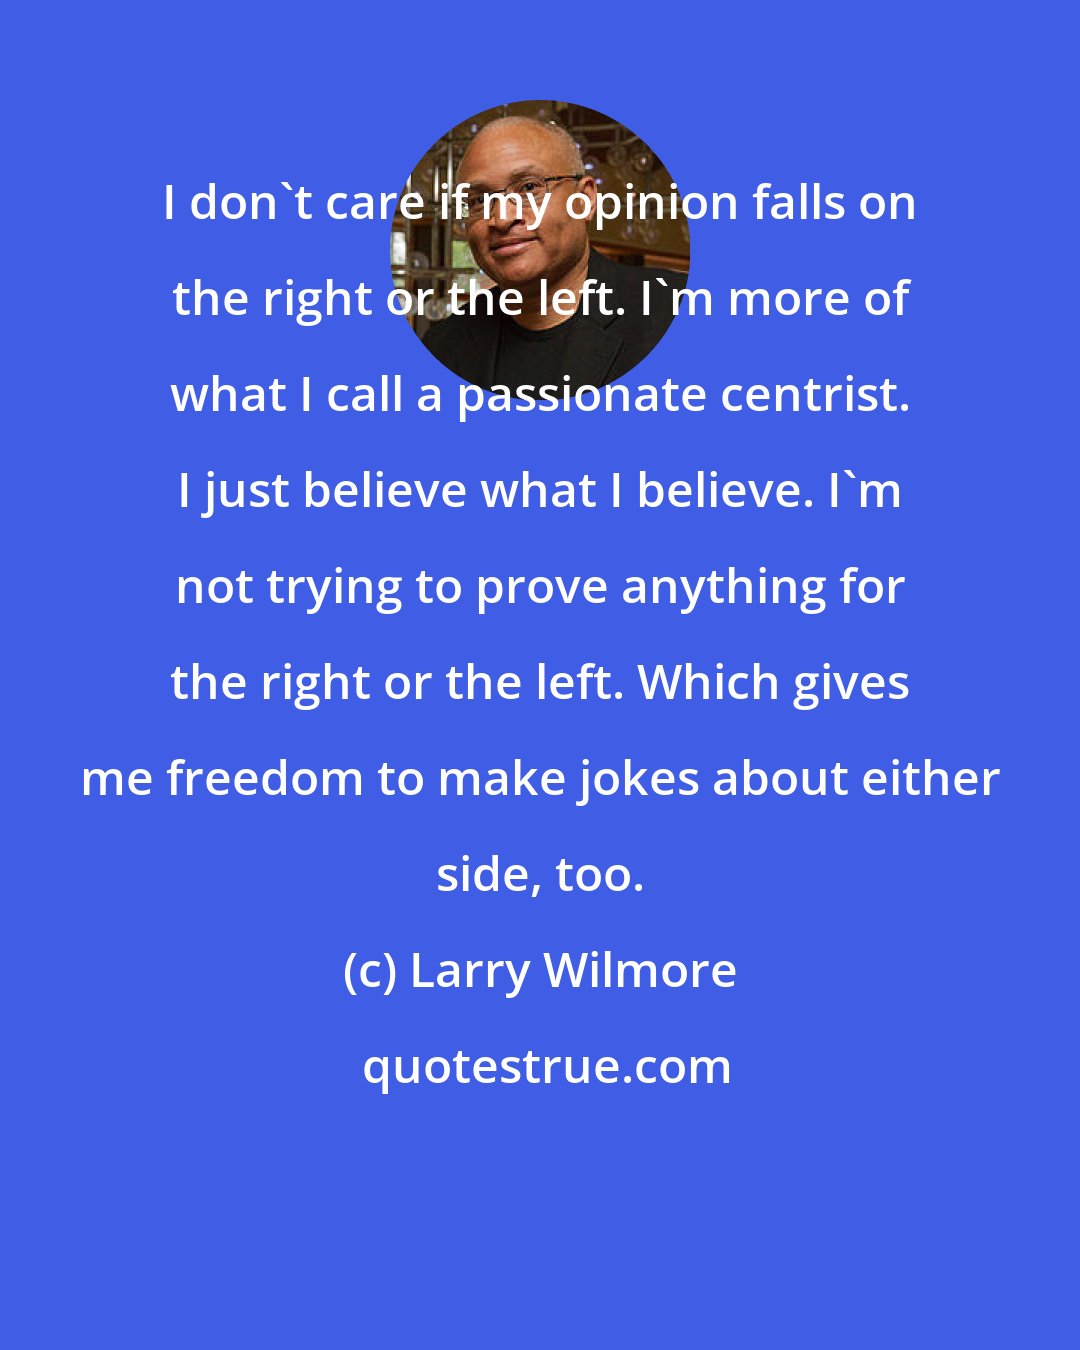 Larry Wilmore: I don't care if my opinion falls on the right or the left. I'm more of what I call a passionate centrist. I just believe what I believe. I'm not trying to prove anything for the right or the left. Which gives me freedom to make jokes about either side, too.